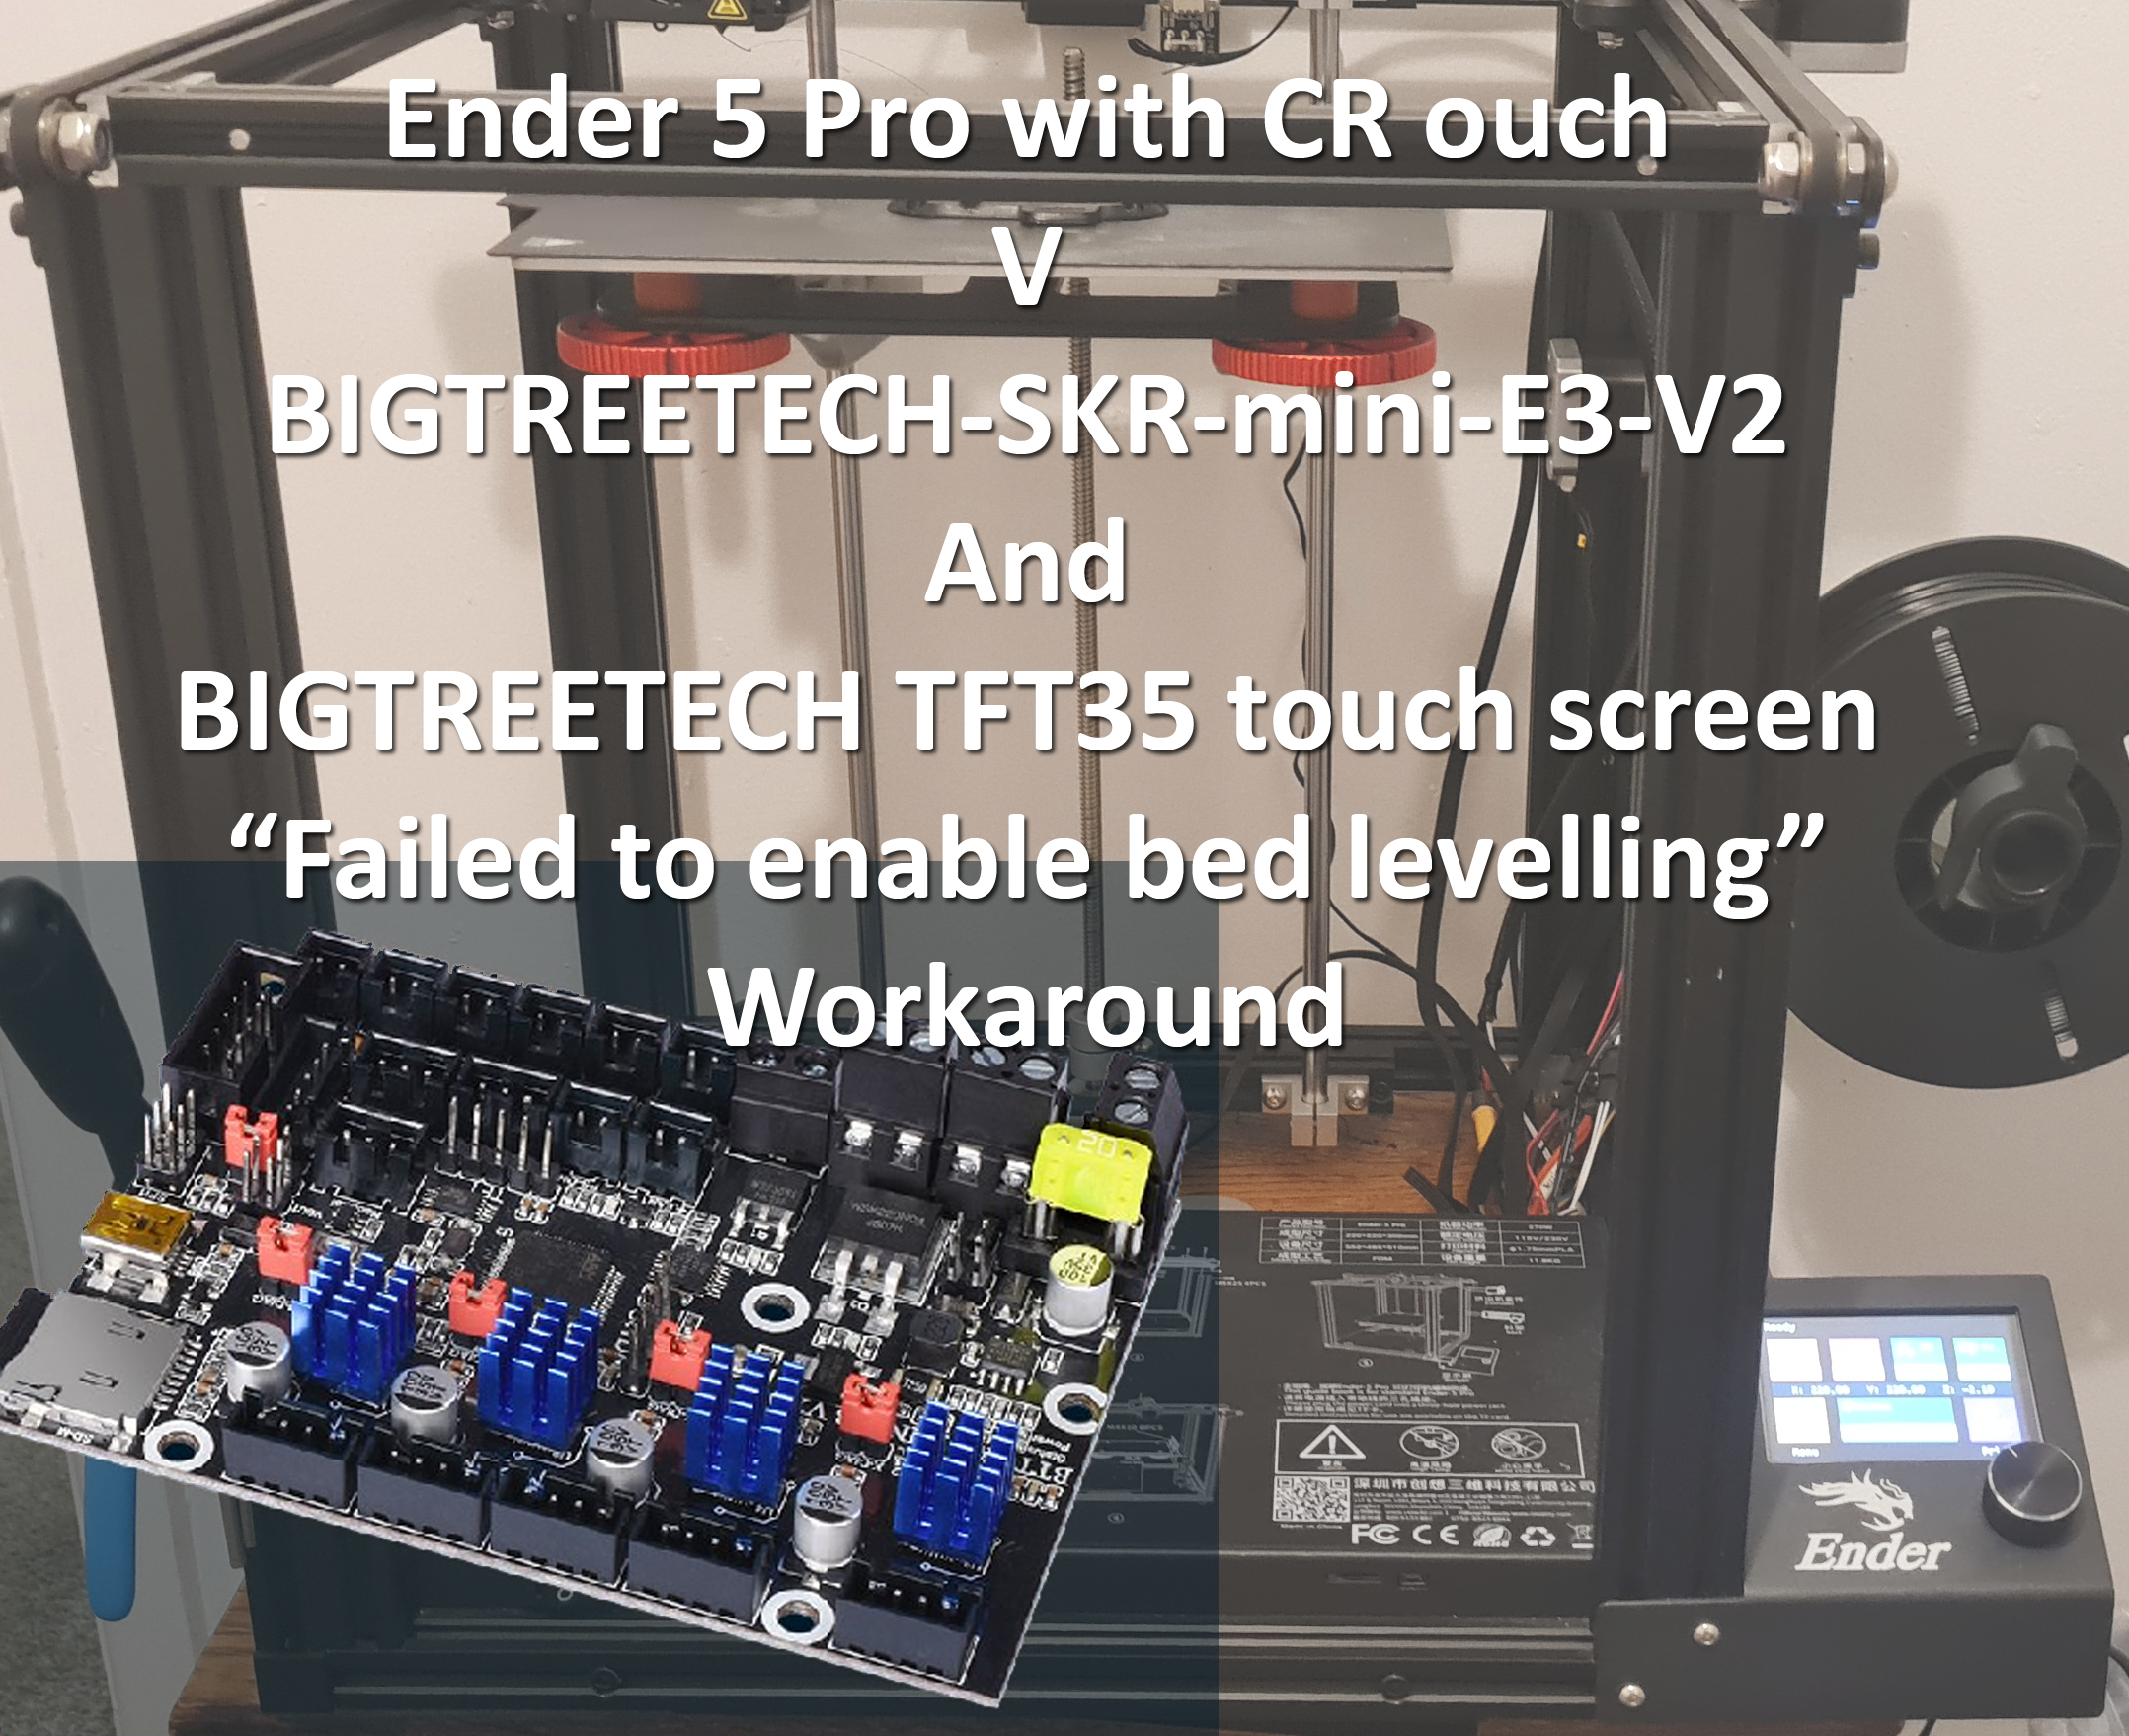 Ender 5 Pro With CR Ouch V BIGTREETECH-SKR-mini-E3-V2 and BIGTREETECH TFT35 Touch Screen “Failed to Enable Bed Levelling” Workaround